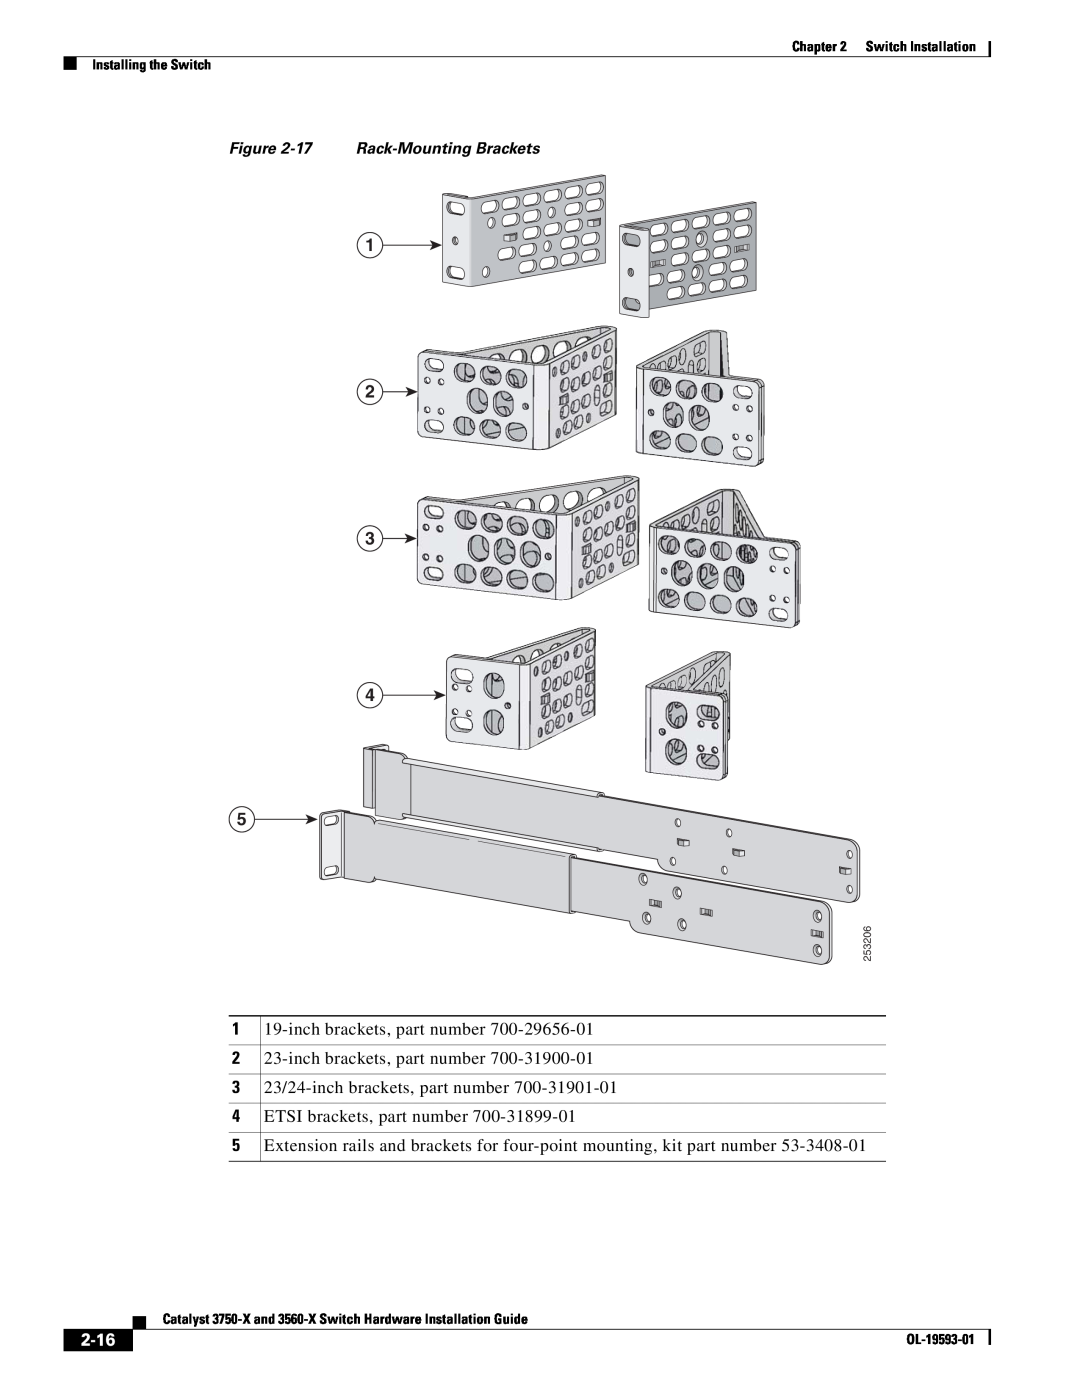 Cisco Systems 3750-X manual 2-16, 17 Rack-Mounting Brackets, Switch Installation Installing the Switch, 253206, OL-19593-01 